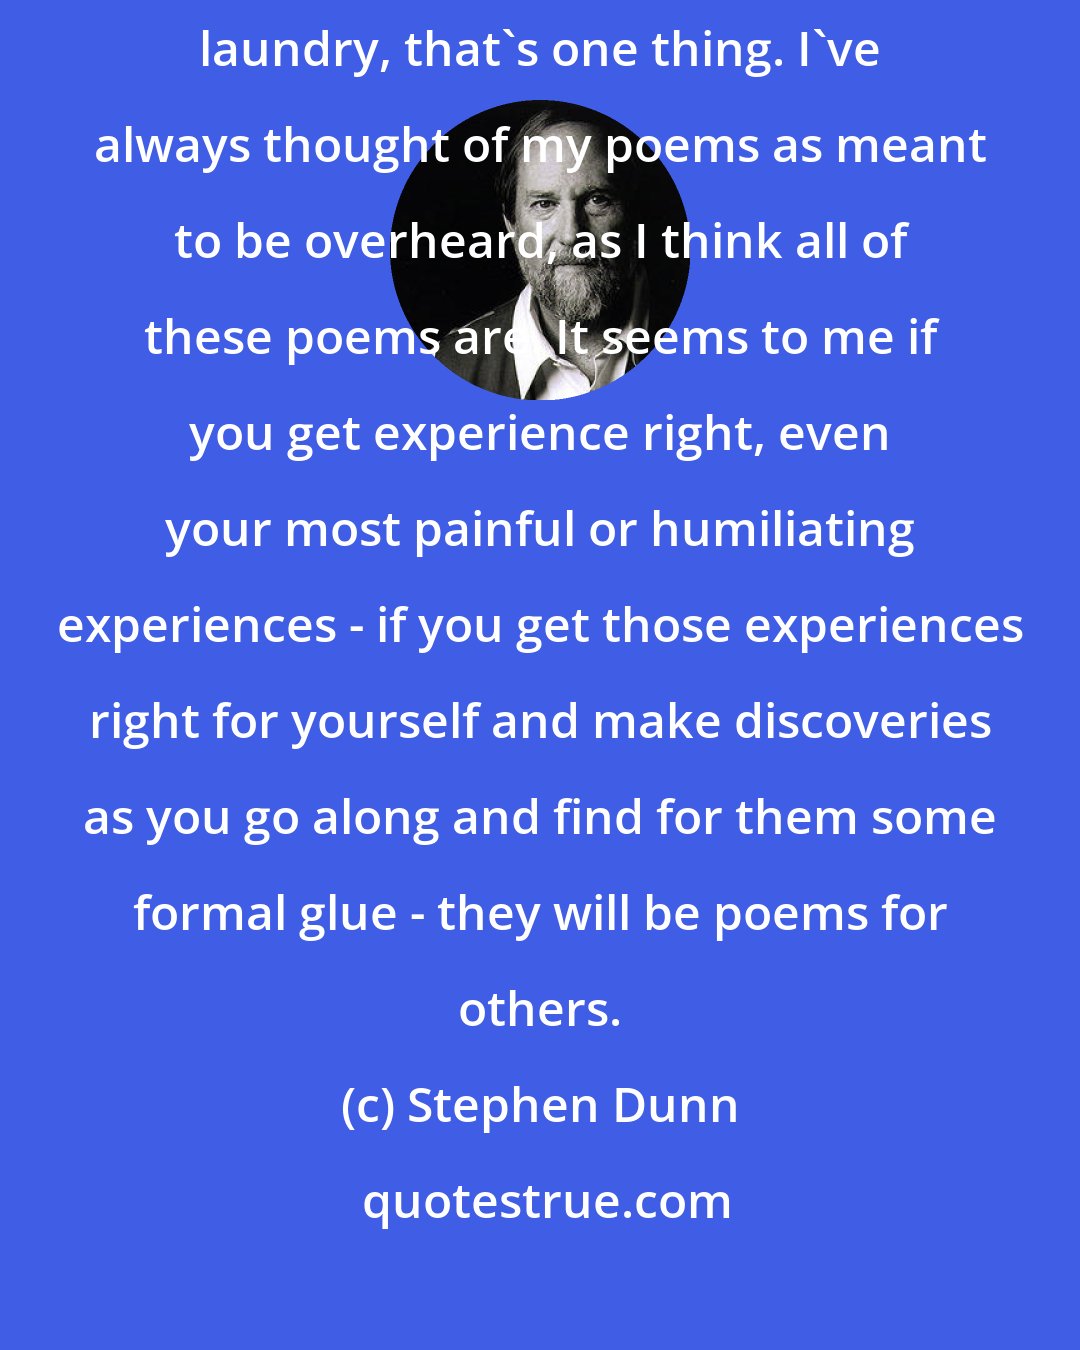 Stephen Dunn: If the motive of writing is for some people a kind of exercise in dirty laundry, that's one thing. I've always thought of my poems as meant to be overheard, as I think all of these poems are. It seems to me if you get experience right, even your most painful or humiliating experiences - if you get those experiences right for yourself and make discoveries as you go along and find for them some formal glue - they will be poems for others.